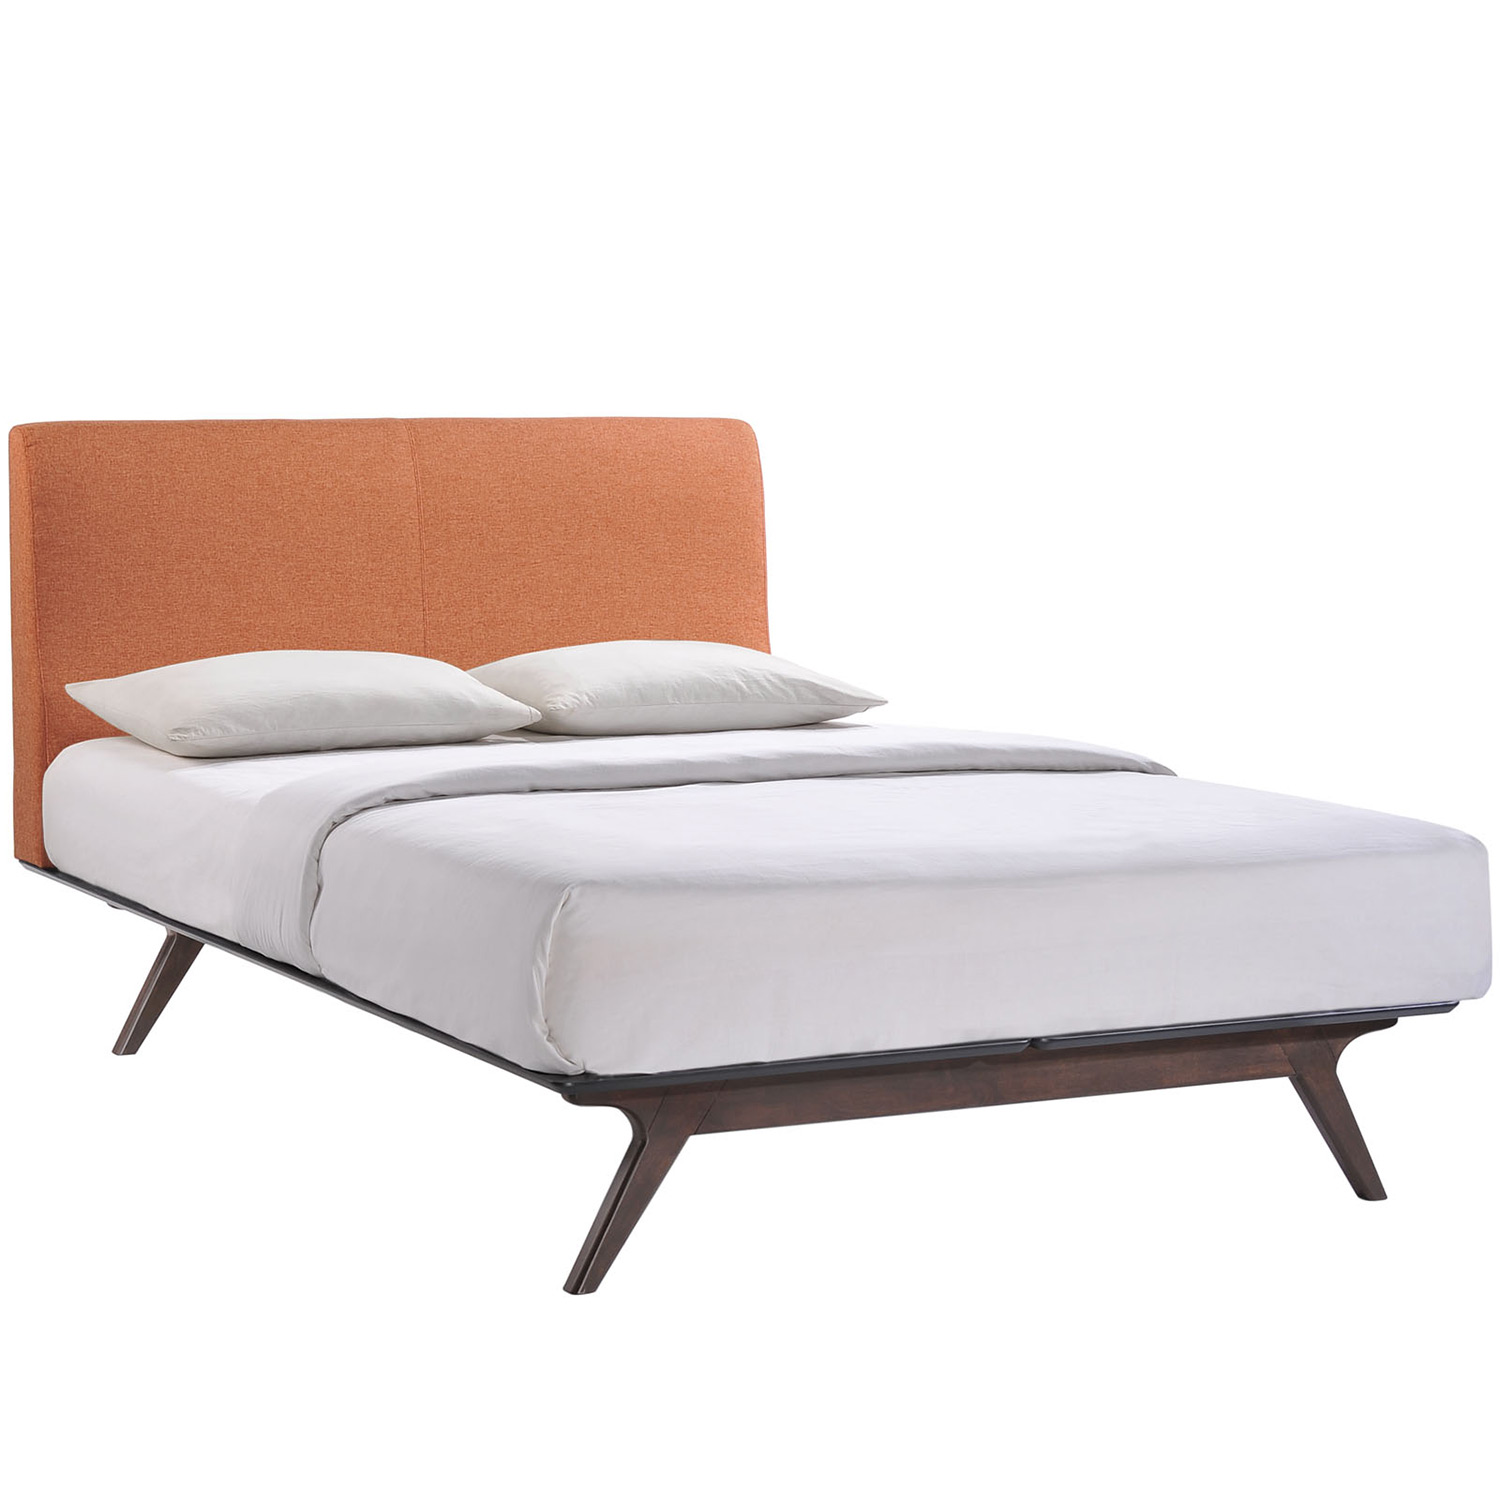 Modway Tracy Bed - Cappuccino Orange